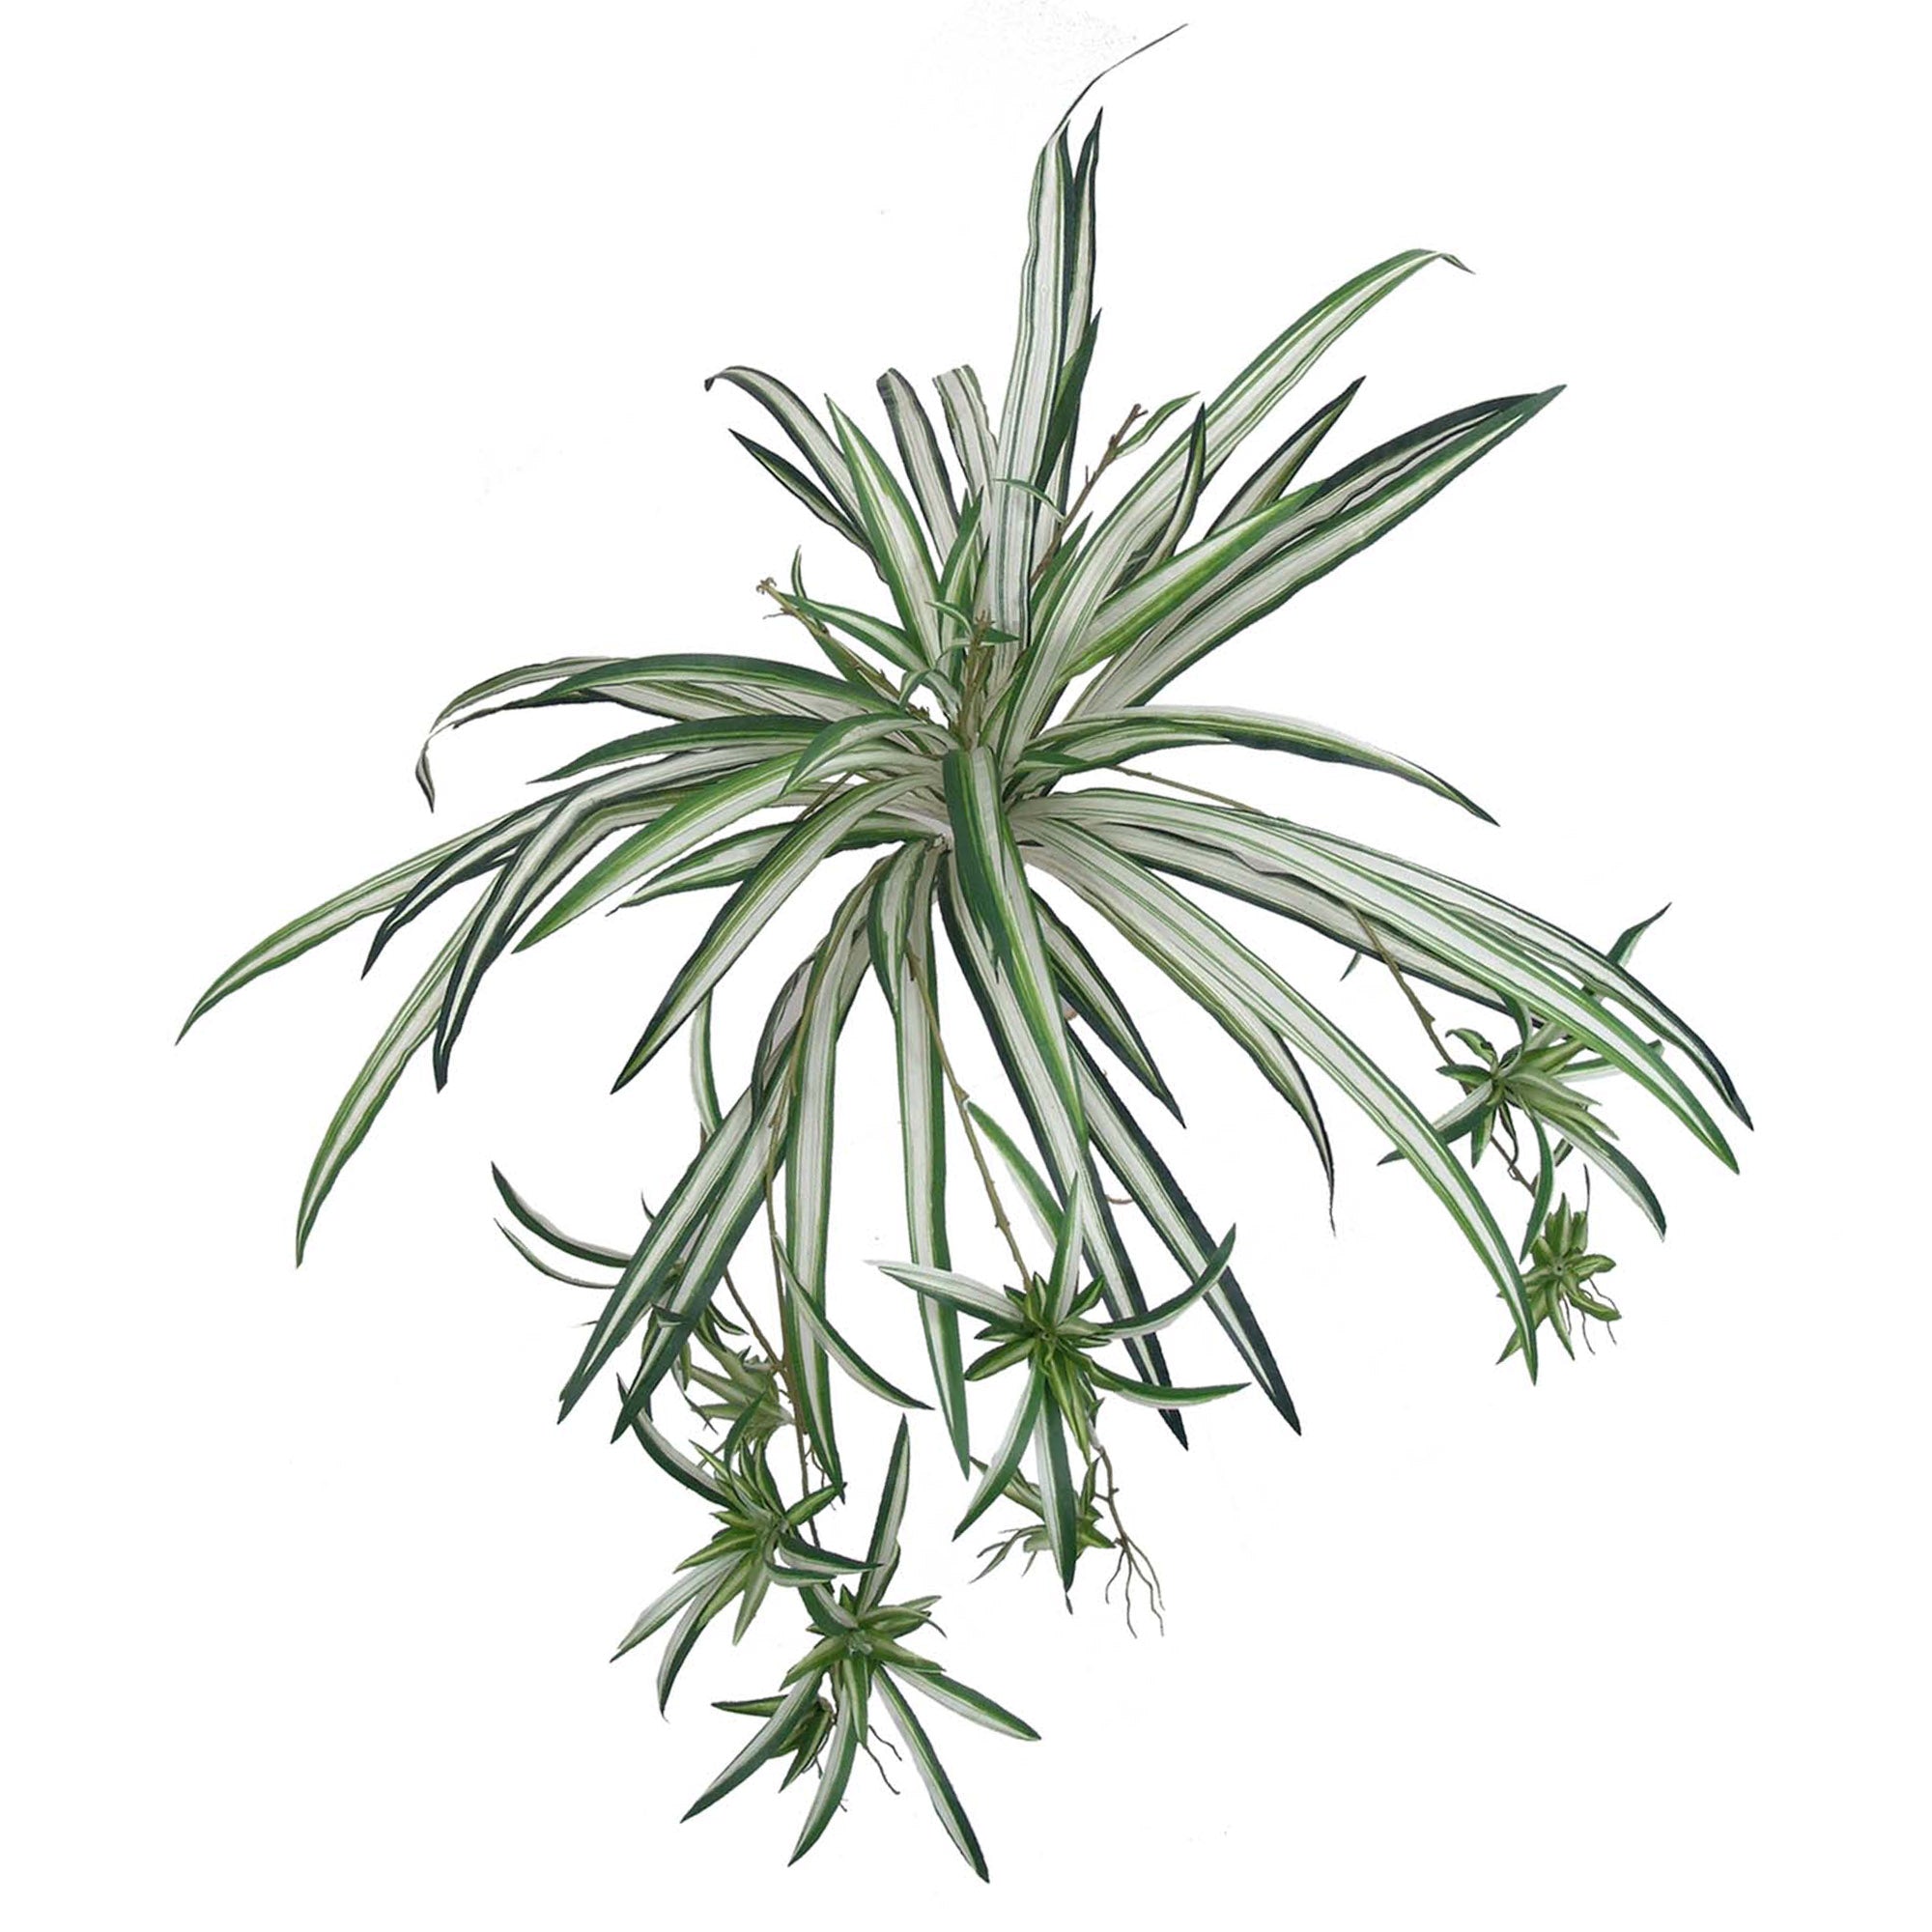 Artificial Spider Plant 32" Dia, 60 Fronds - Lifelike Faux Greenery, Indoor & Outdoor Decor, Low-Maintenance Home Accent